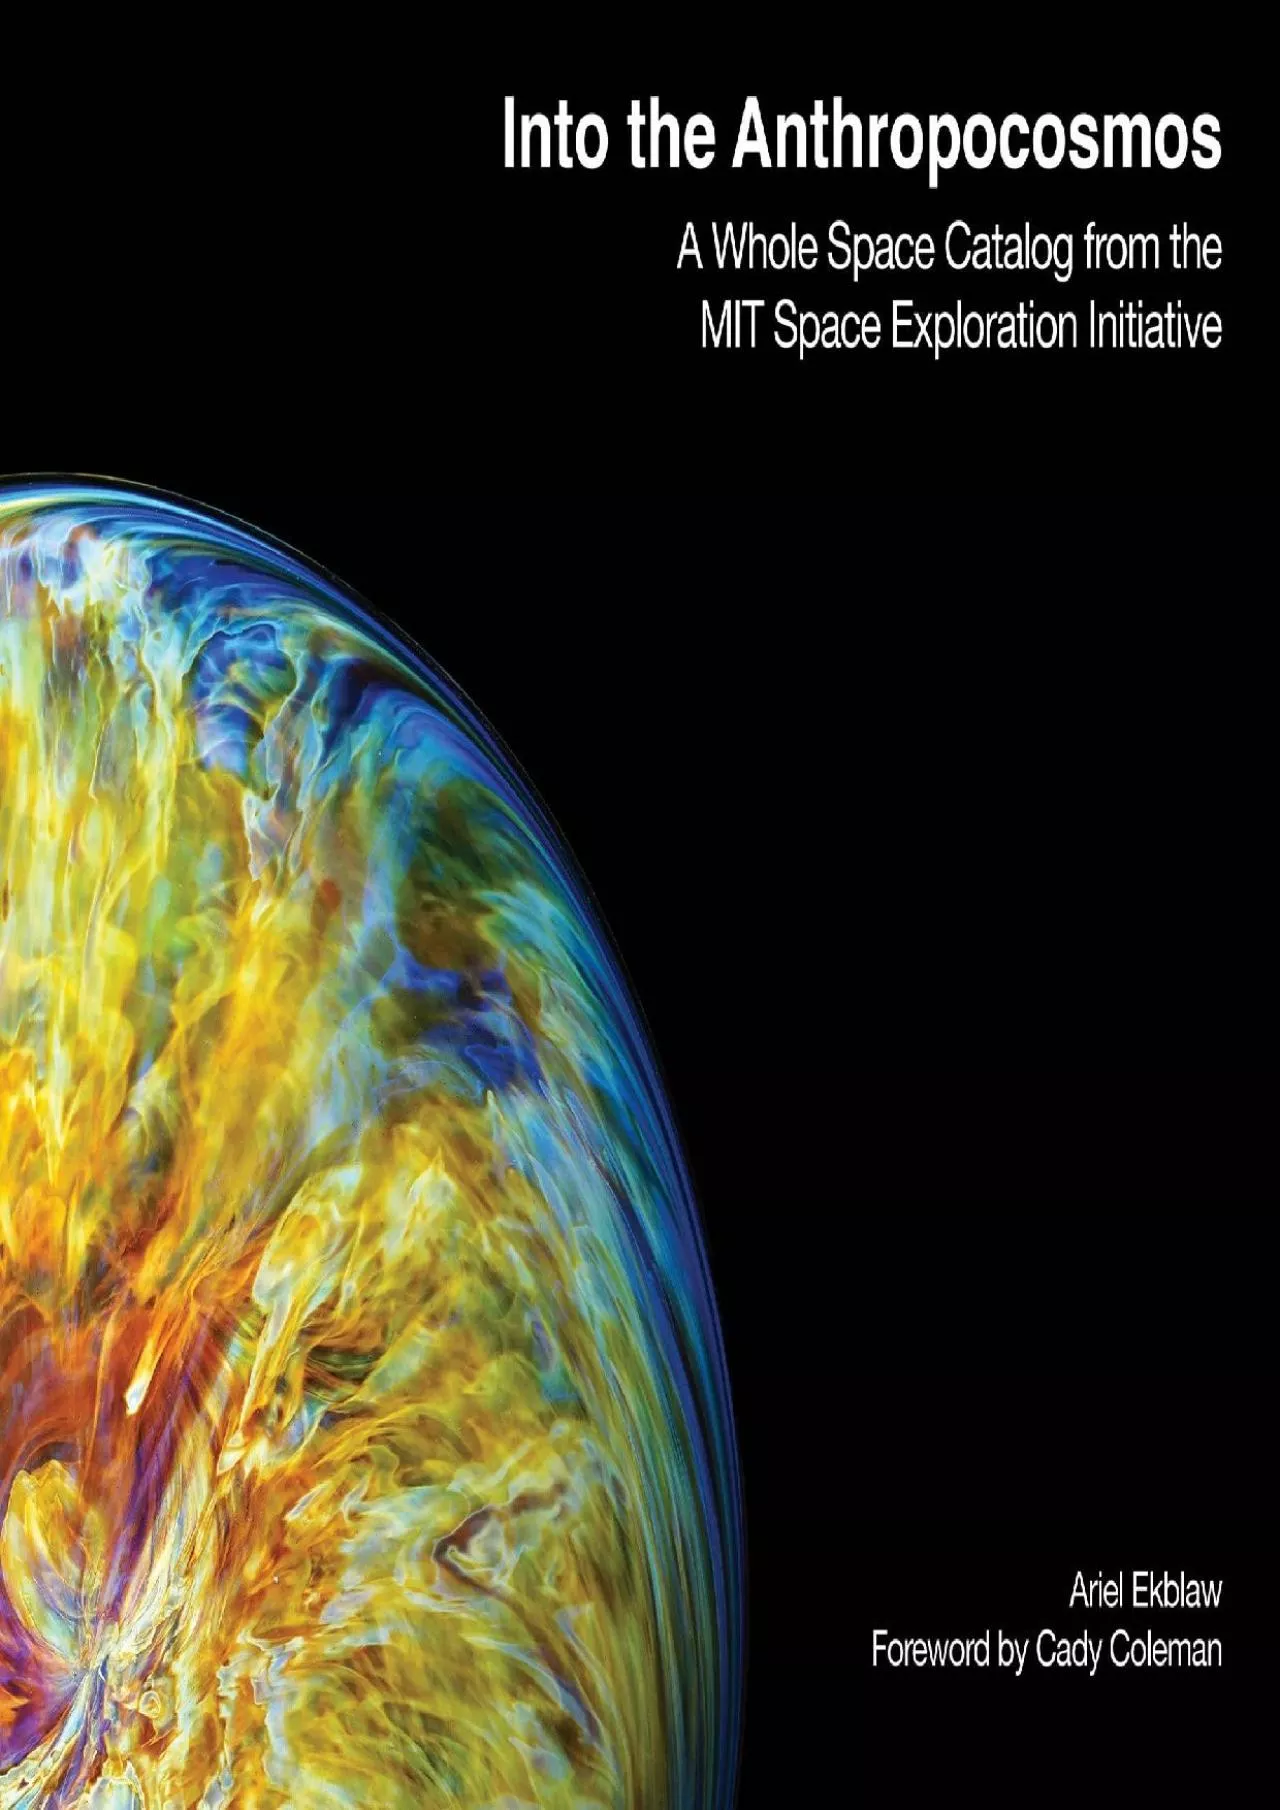 [EBOOK]-Into the Anthropocosmos: A Whole Space Catalog from the MIT Space Exploration